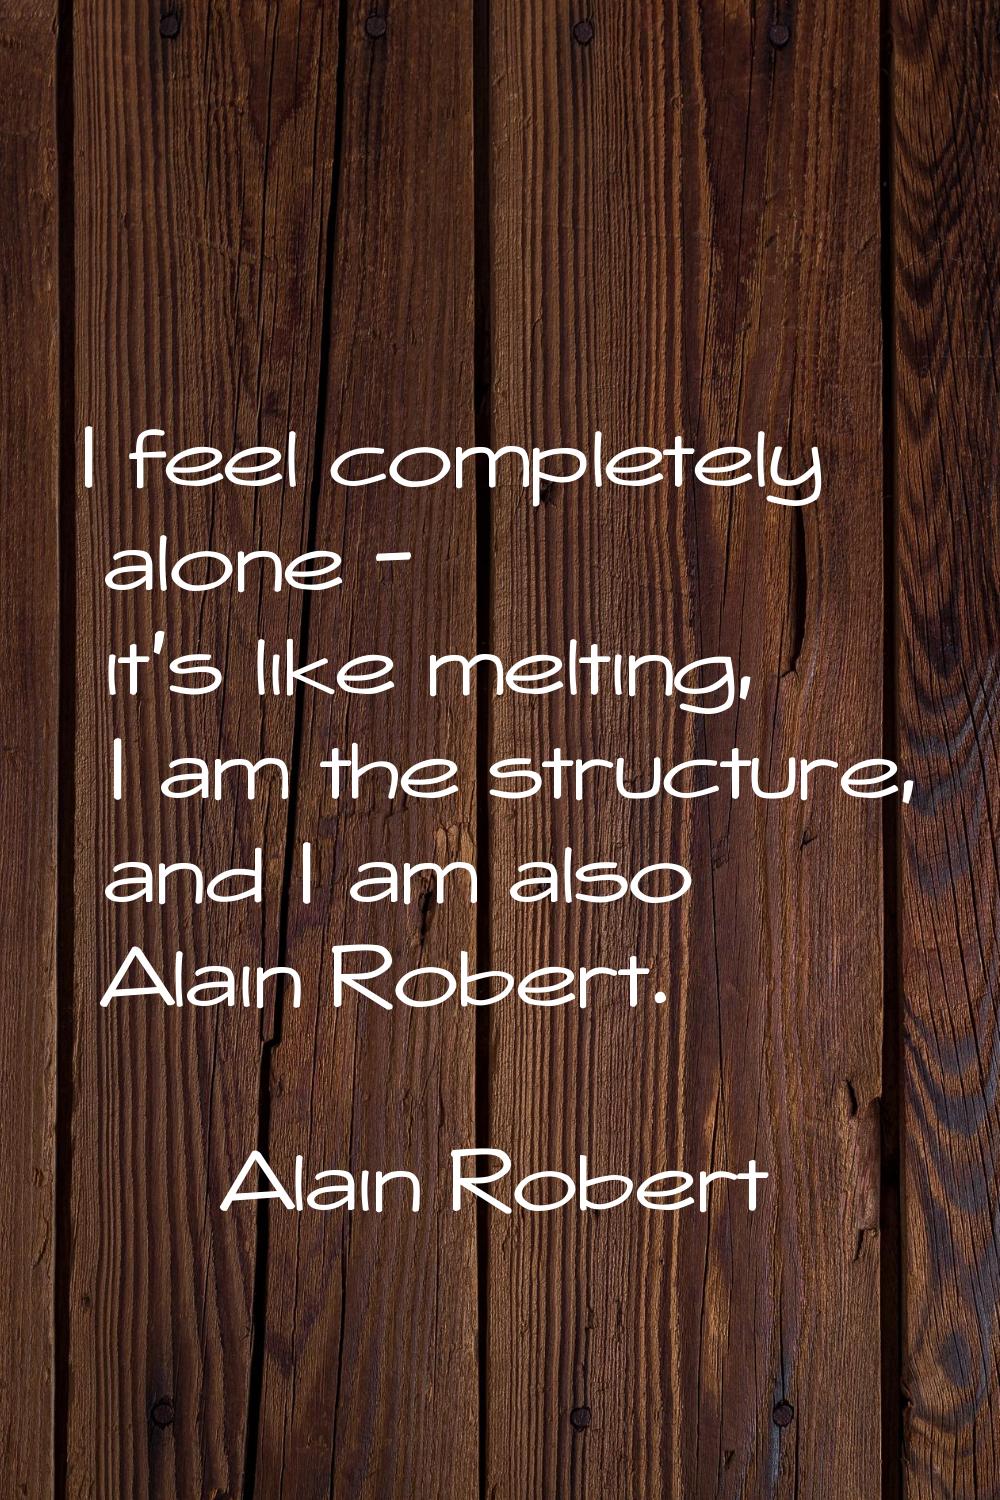 I feel completely alone - it's like melting, I am the structure, and I am also Alain Robert.